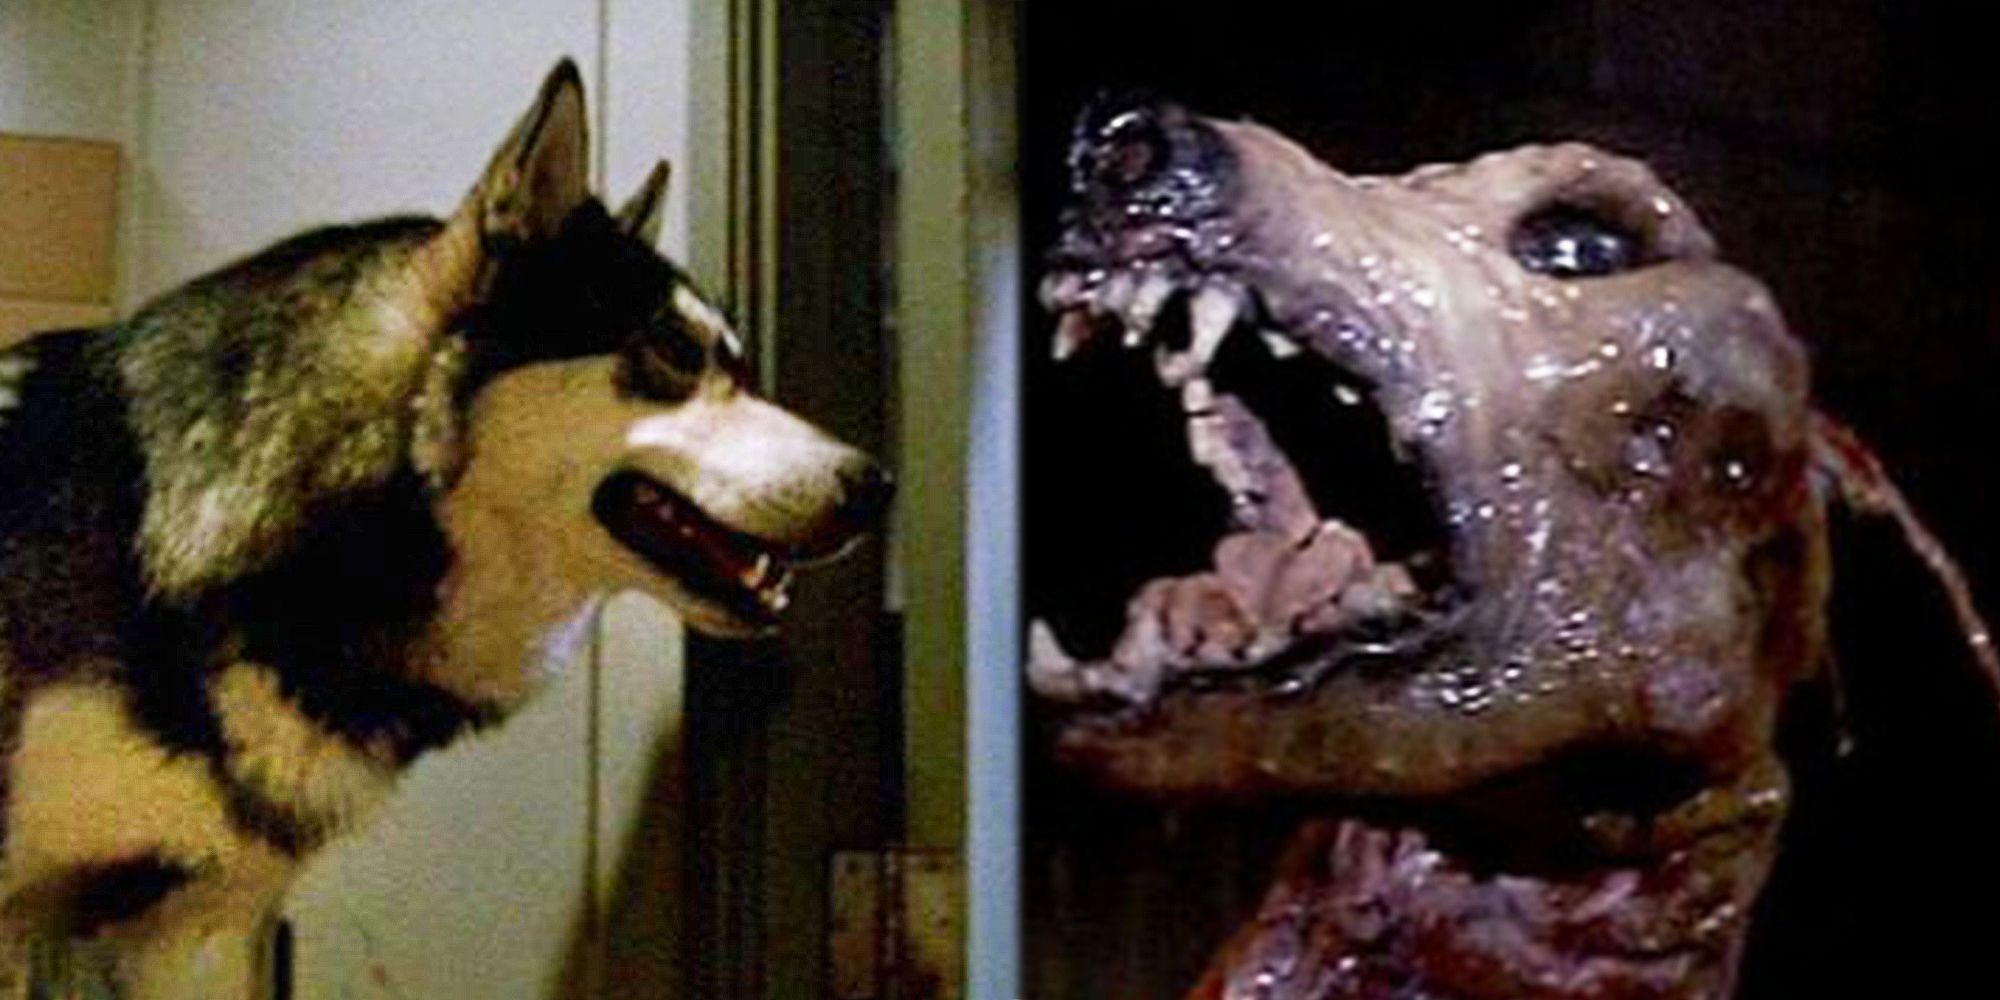 The Dog-Thing in John Carpenter's The Thing